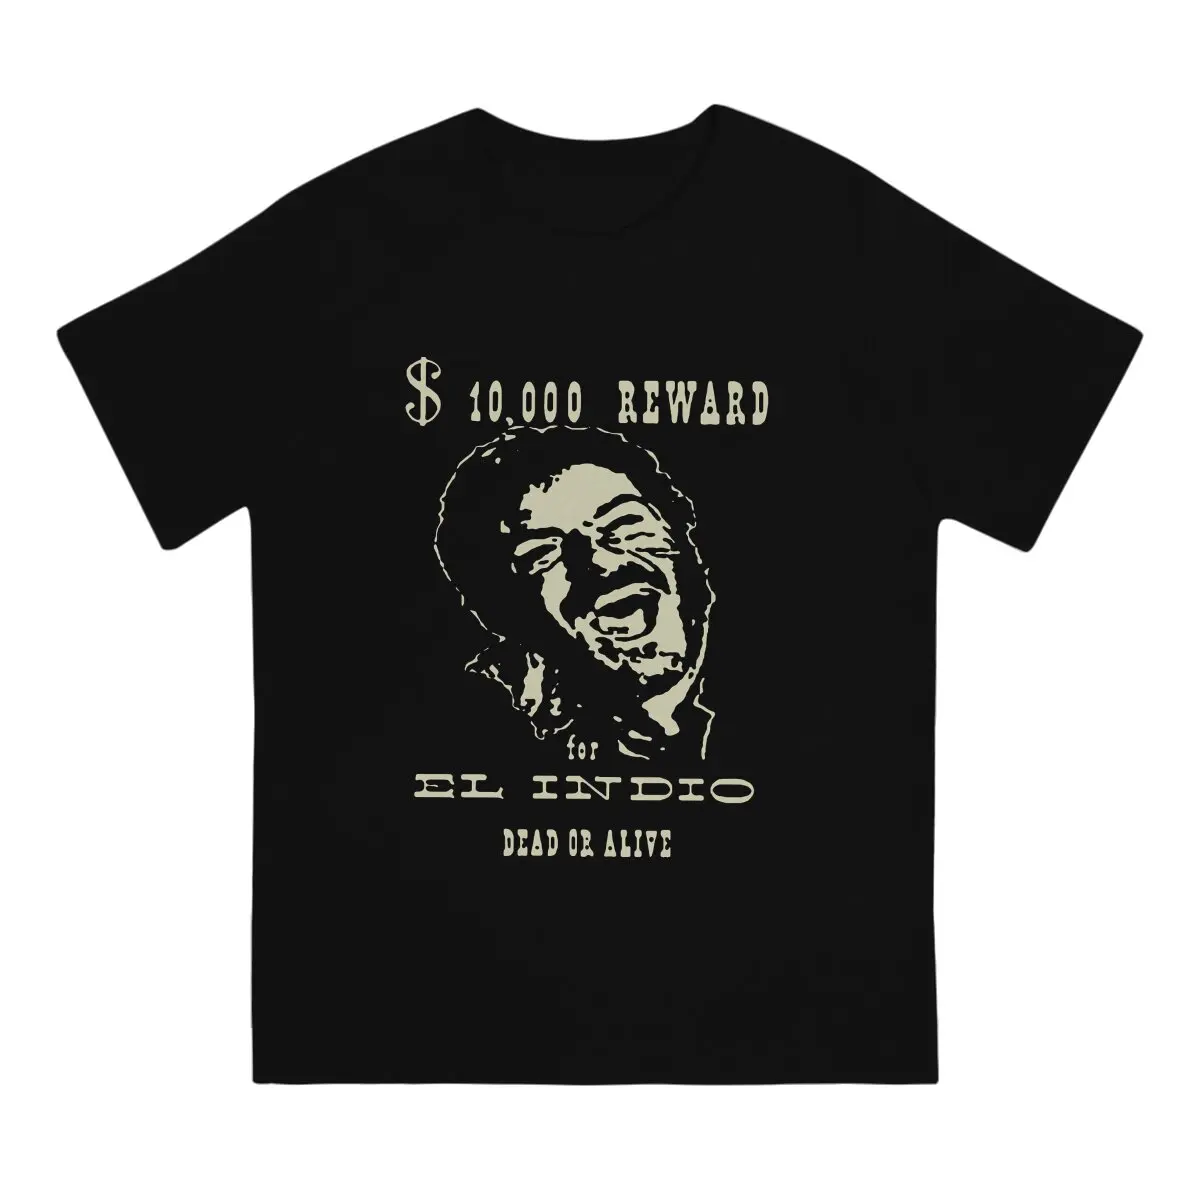 

El Indio Classic T-Shirts Men The Good The Bad and The Ugly Film Amazing Pure Cotton Tee Shirt Crewneck Short Sleeve T Shirts